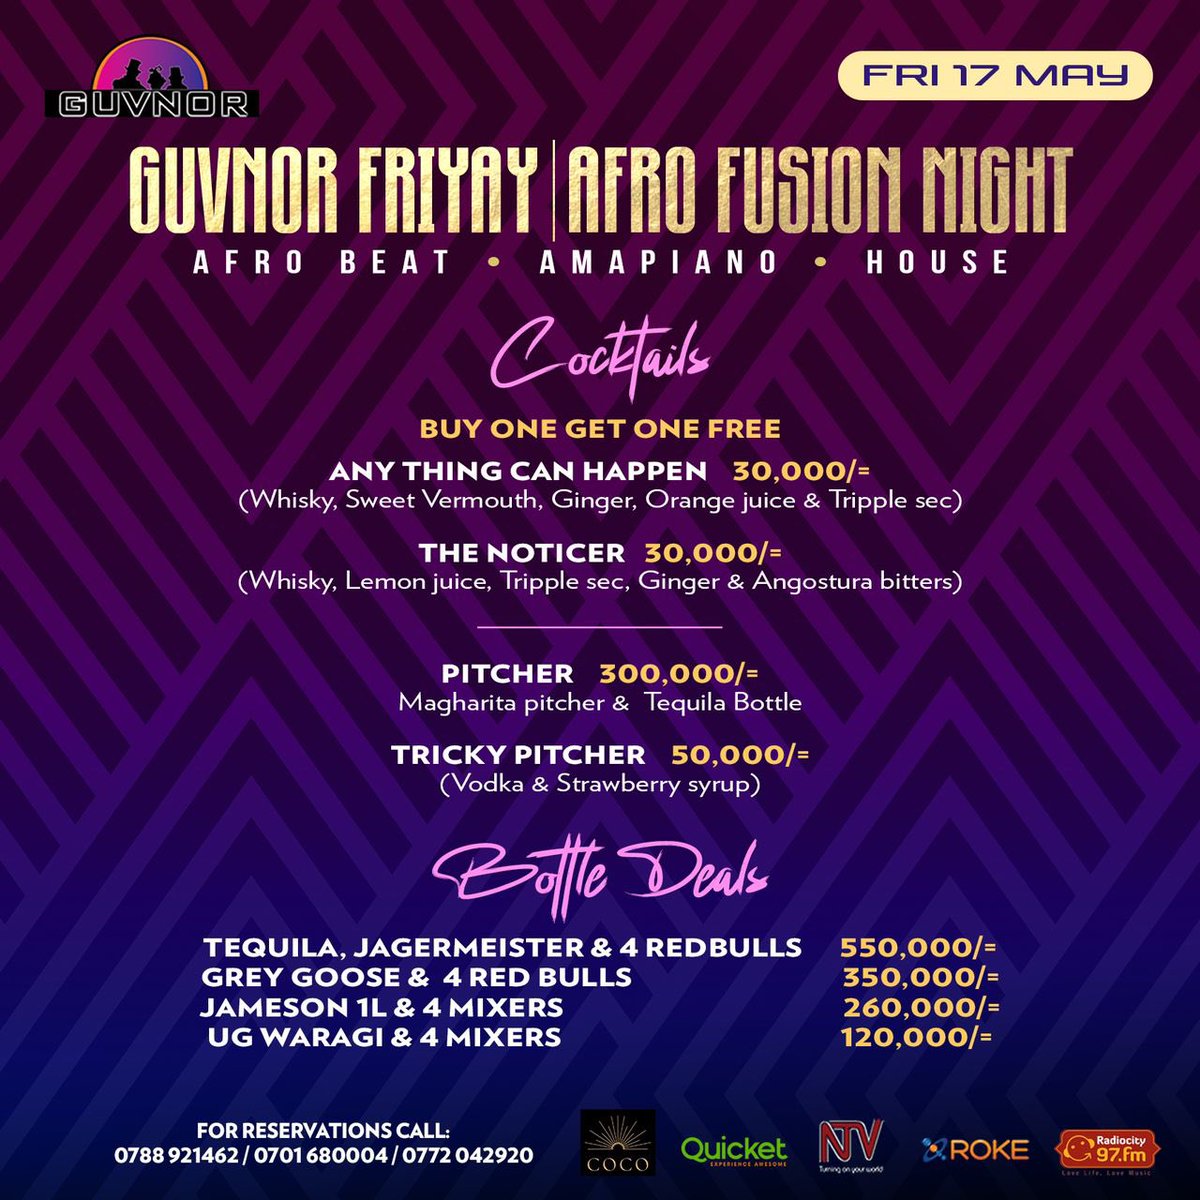 *Guvnor FriYAY Featuring Performances by *ILL GEE* And *AKEINE* Plus Top Ah Top Afro Fusion Hits & Grooves By The Freshest DJs; Hady, Etania, Bugy, Vanns, Kai 🔥 Doors Open 9pm 15K Early Bird Tickets Available On Quicket 25K At The Door #GuvnorGovernsTheNight #sipNswipe